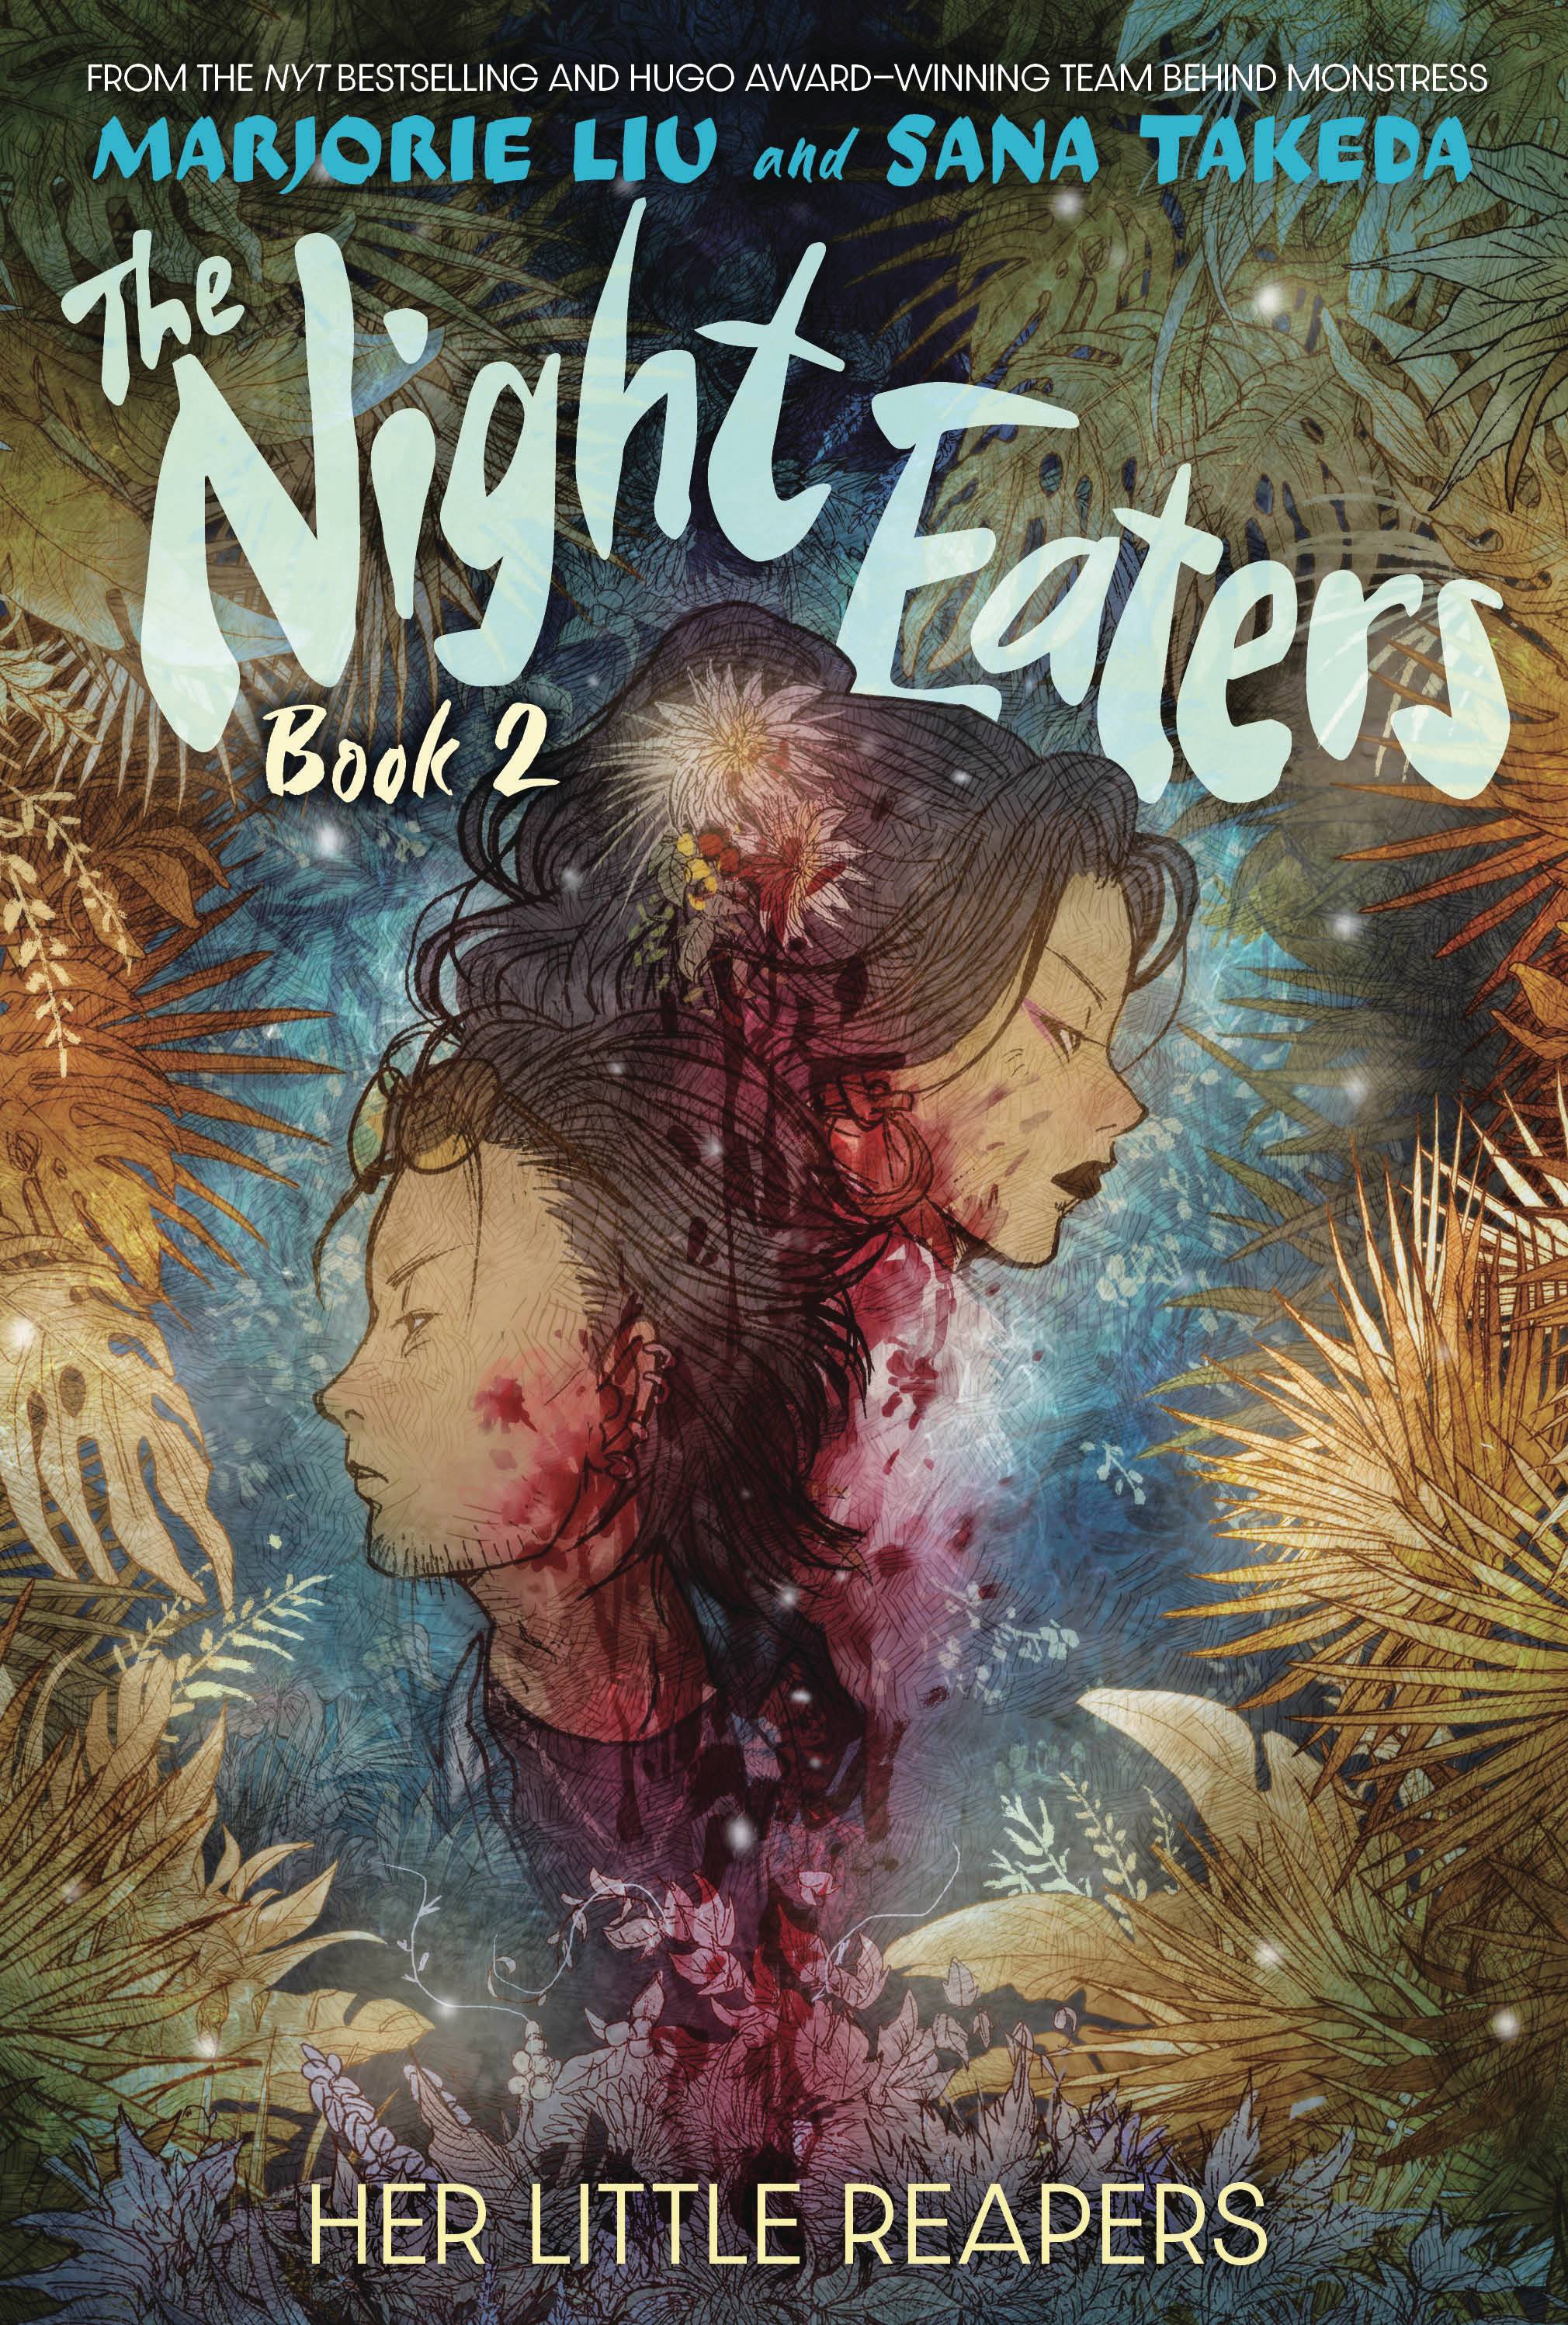 THE NIGHT EATERS VOLUME 2 from AbramsComicsArts